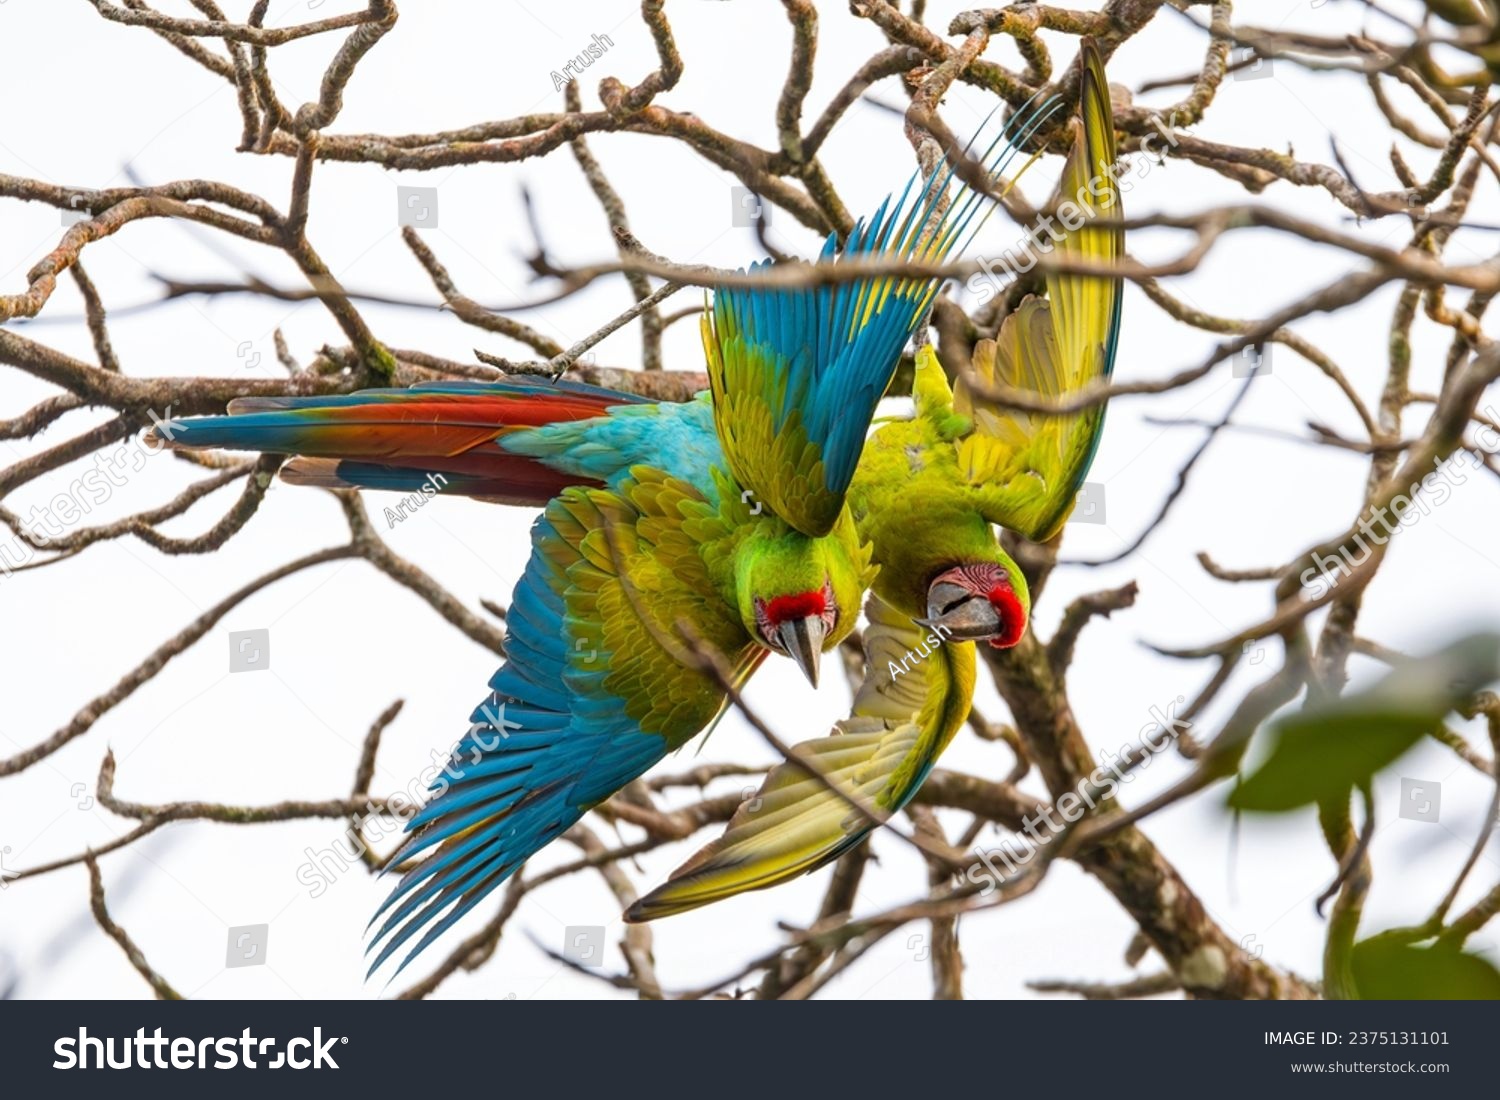 Great green macaw (Ara ambiguus), also known as Buffon's macaw or the great military macaw. Ara ambiguus is listed as Critically Endangered. Tortuguero, Wildlife and birdwatching in Costa Rica. #2375131101